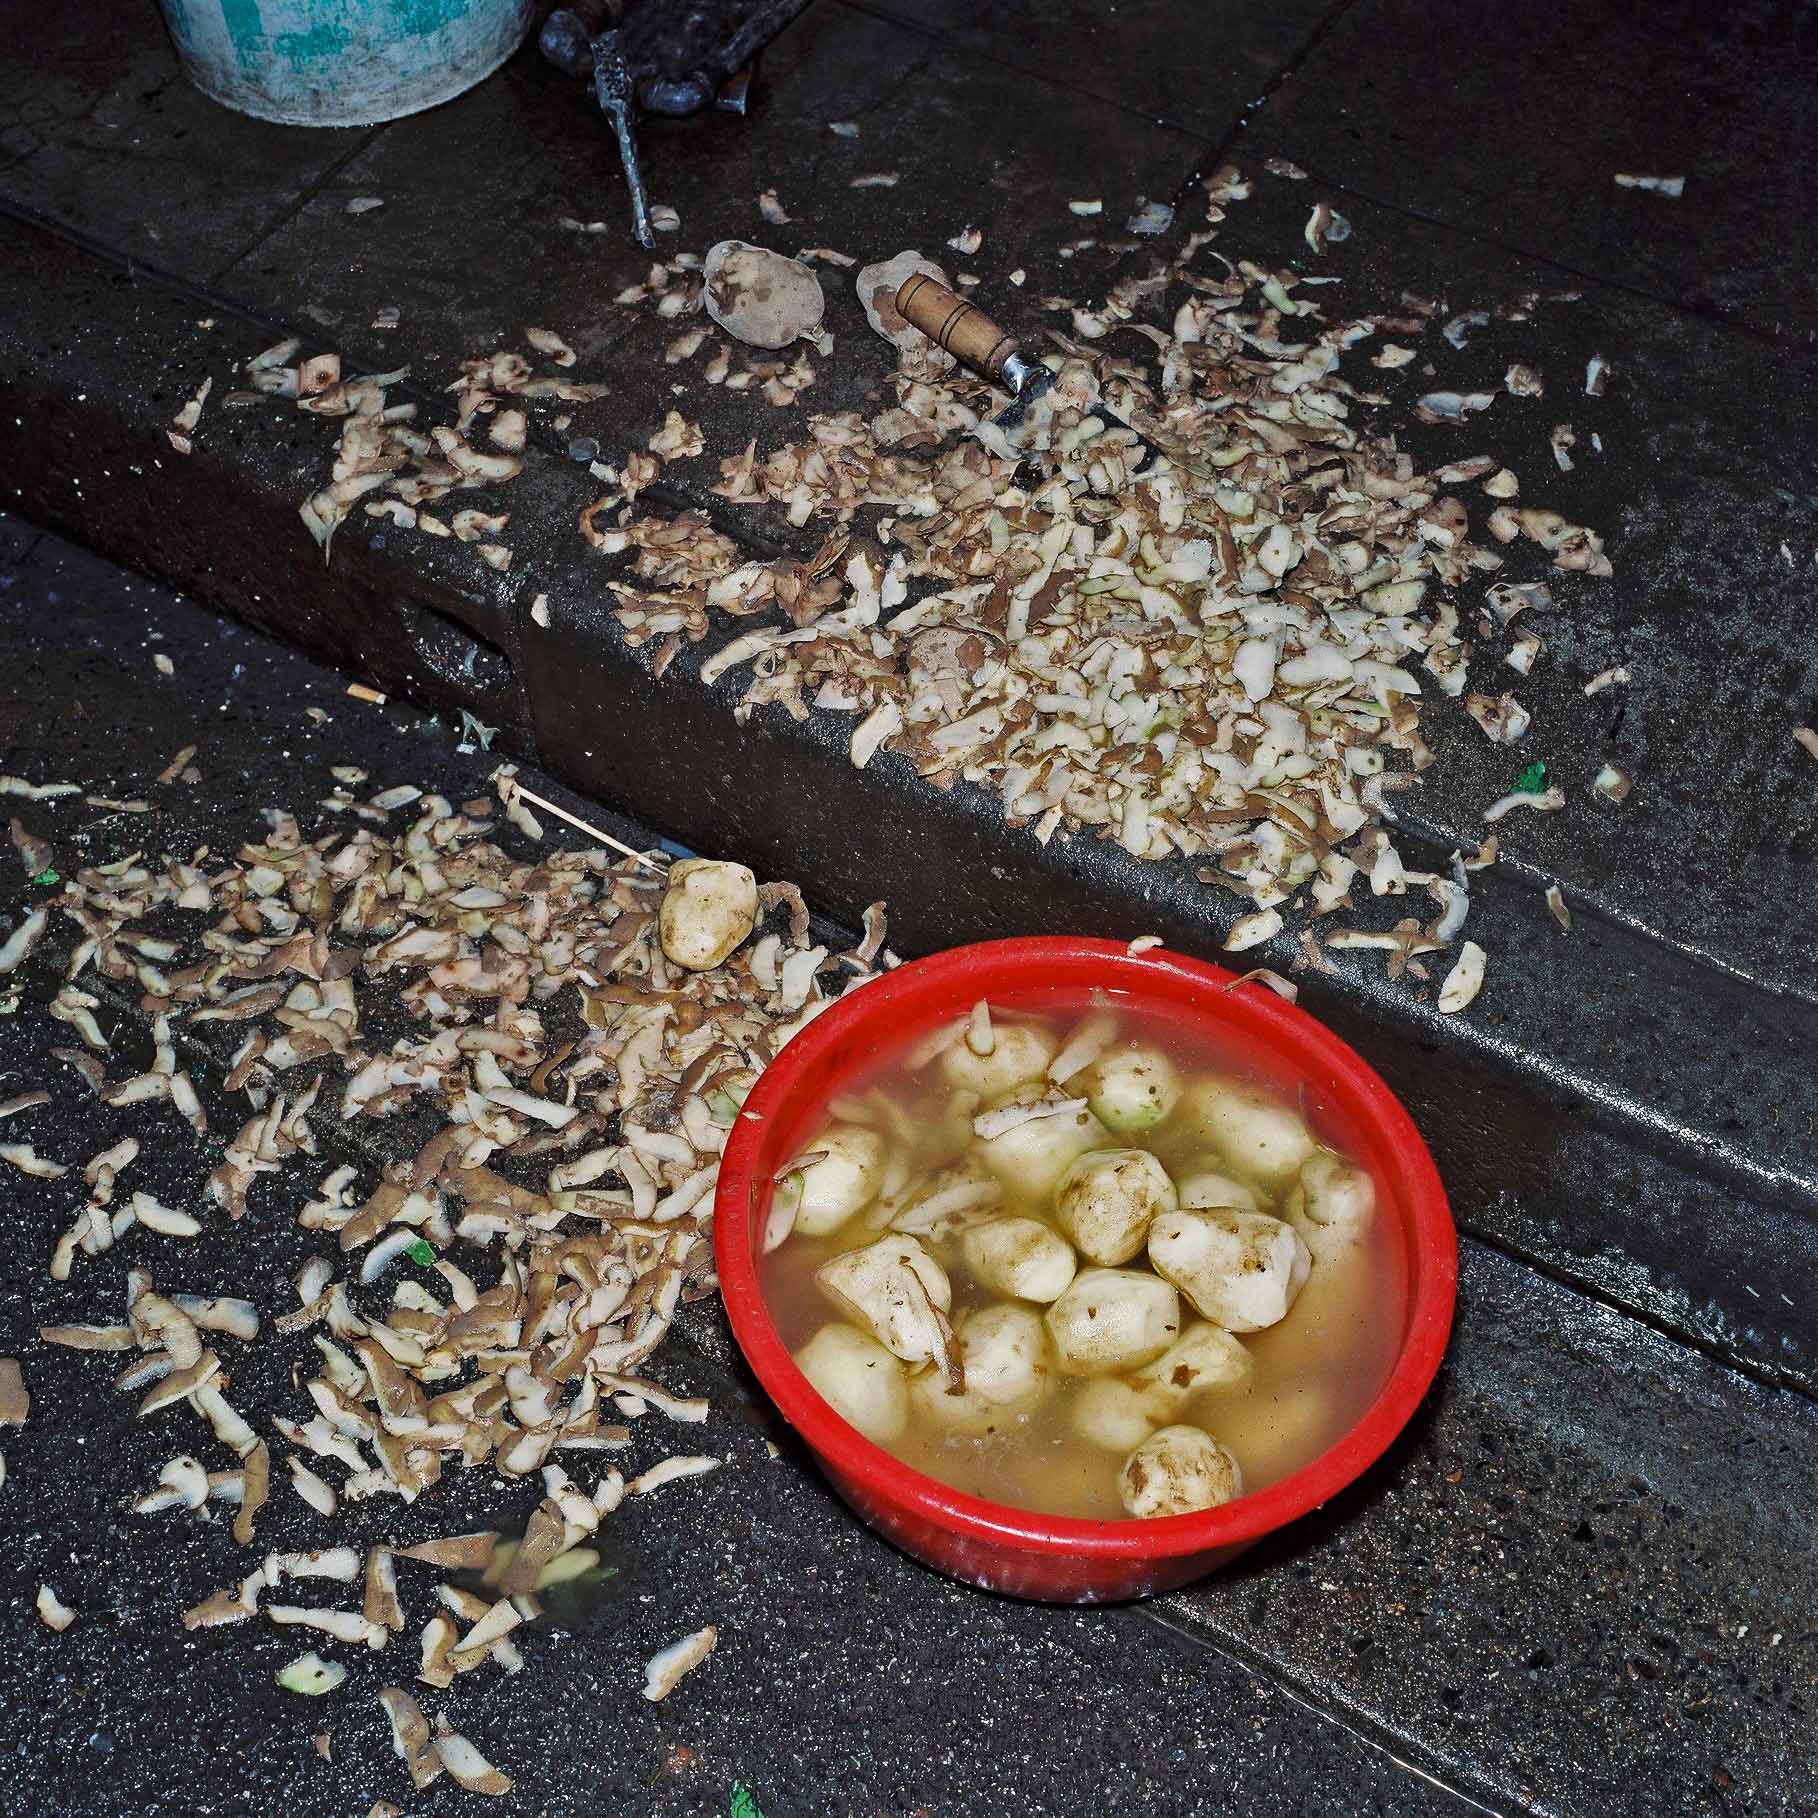 A red plastic bowl with peeled potatoes and peelings scattered around. 